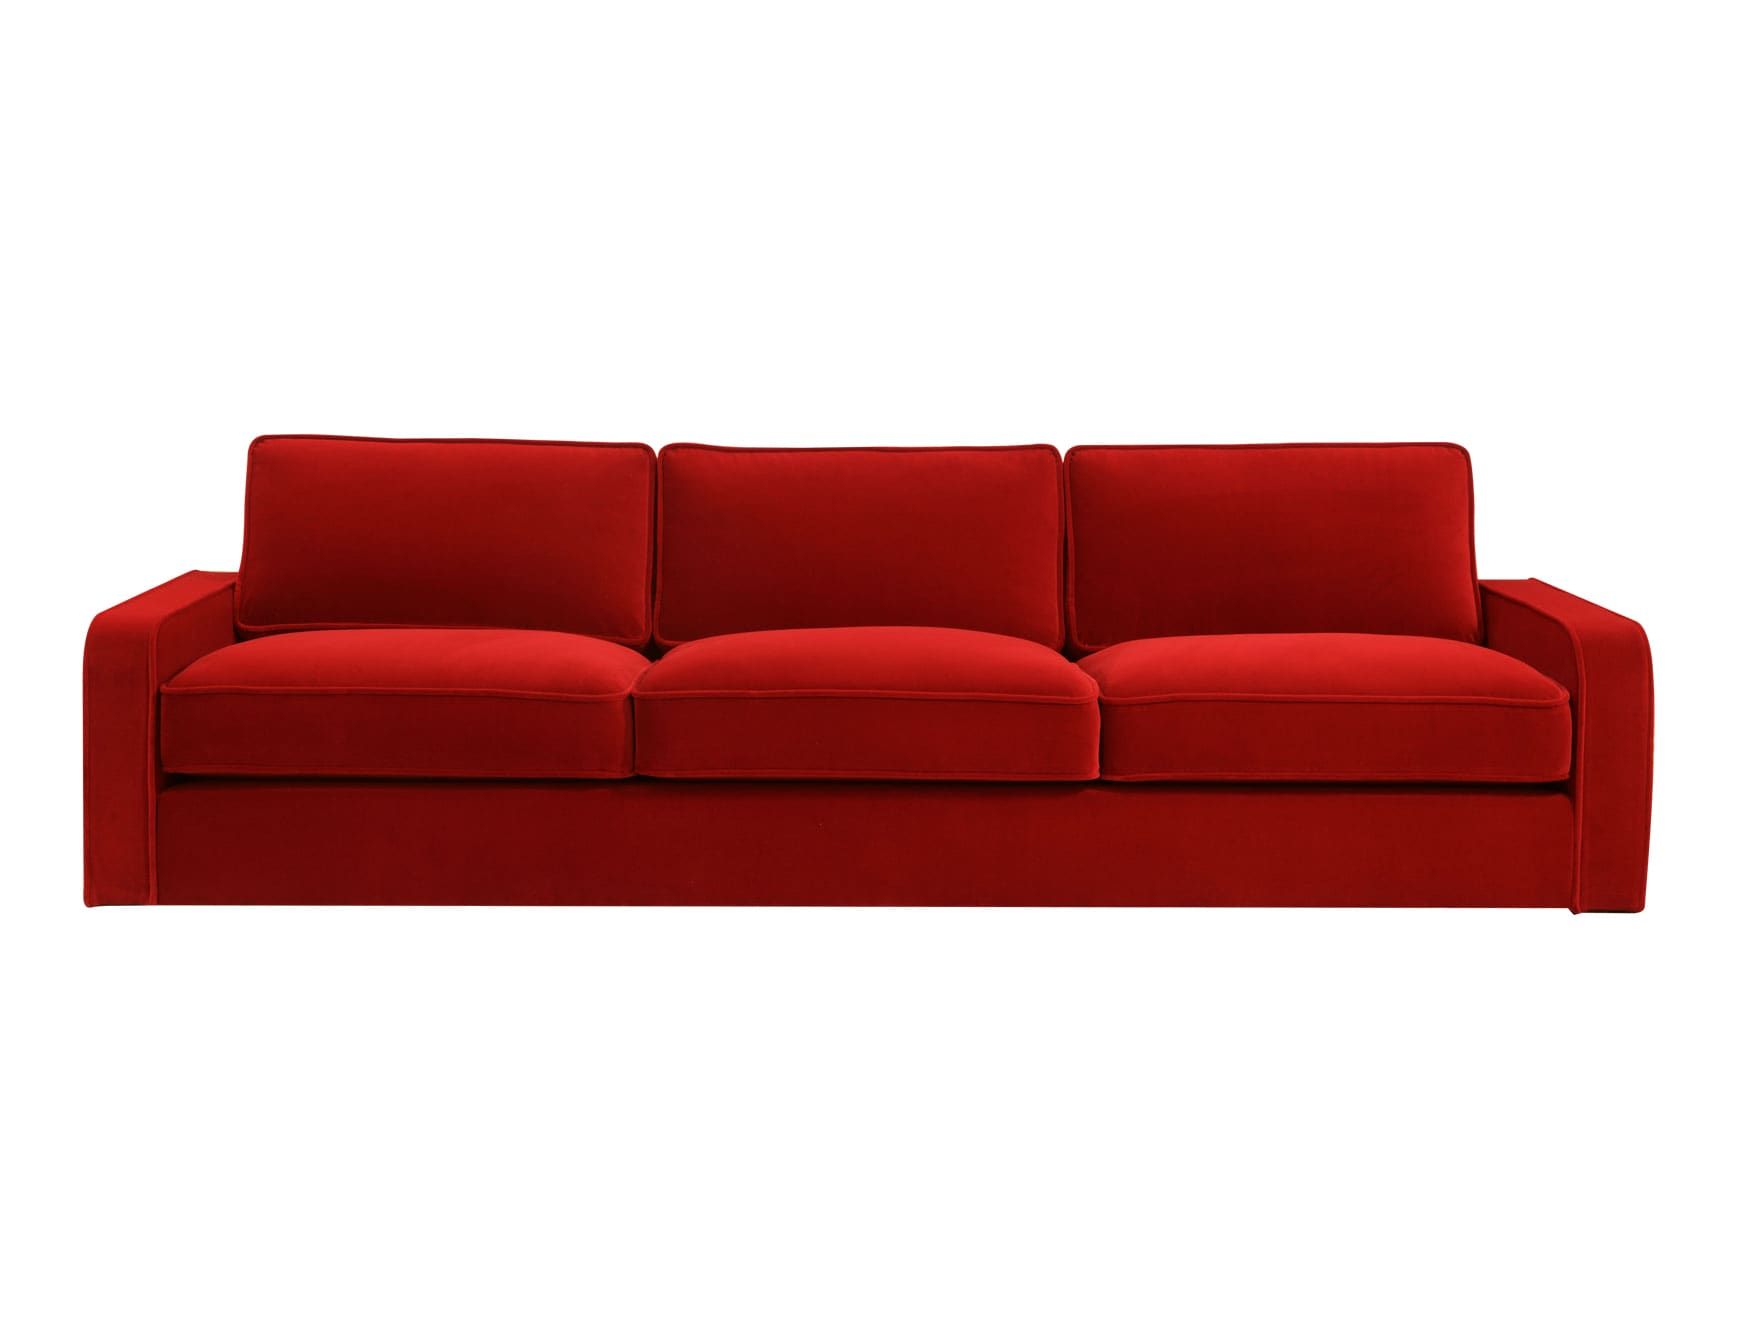 Romeo modern Italian sofa chair with red leather